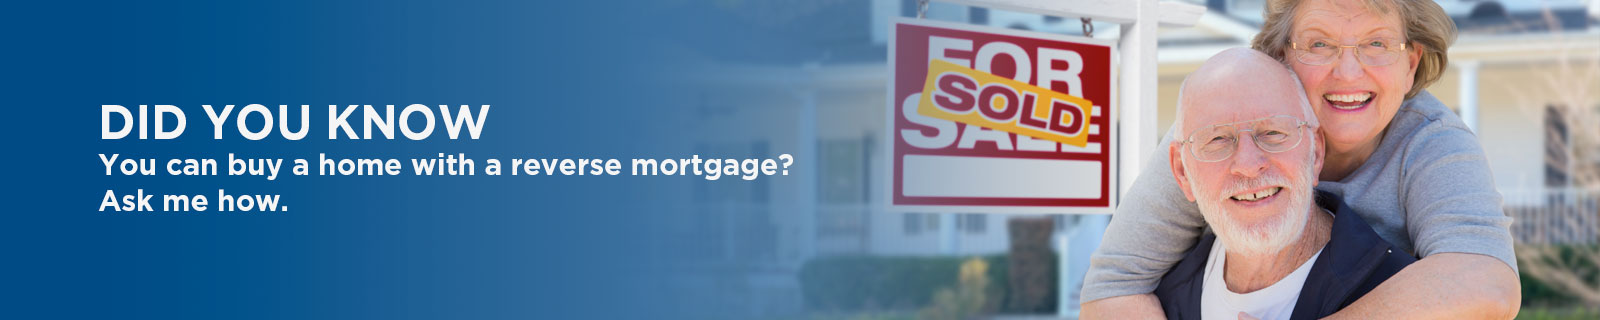 Did you know you can buy a home with a reverse mortgage?